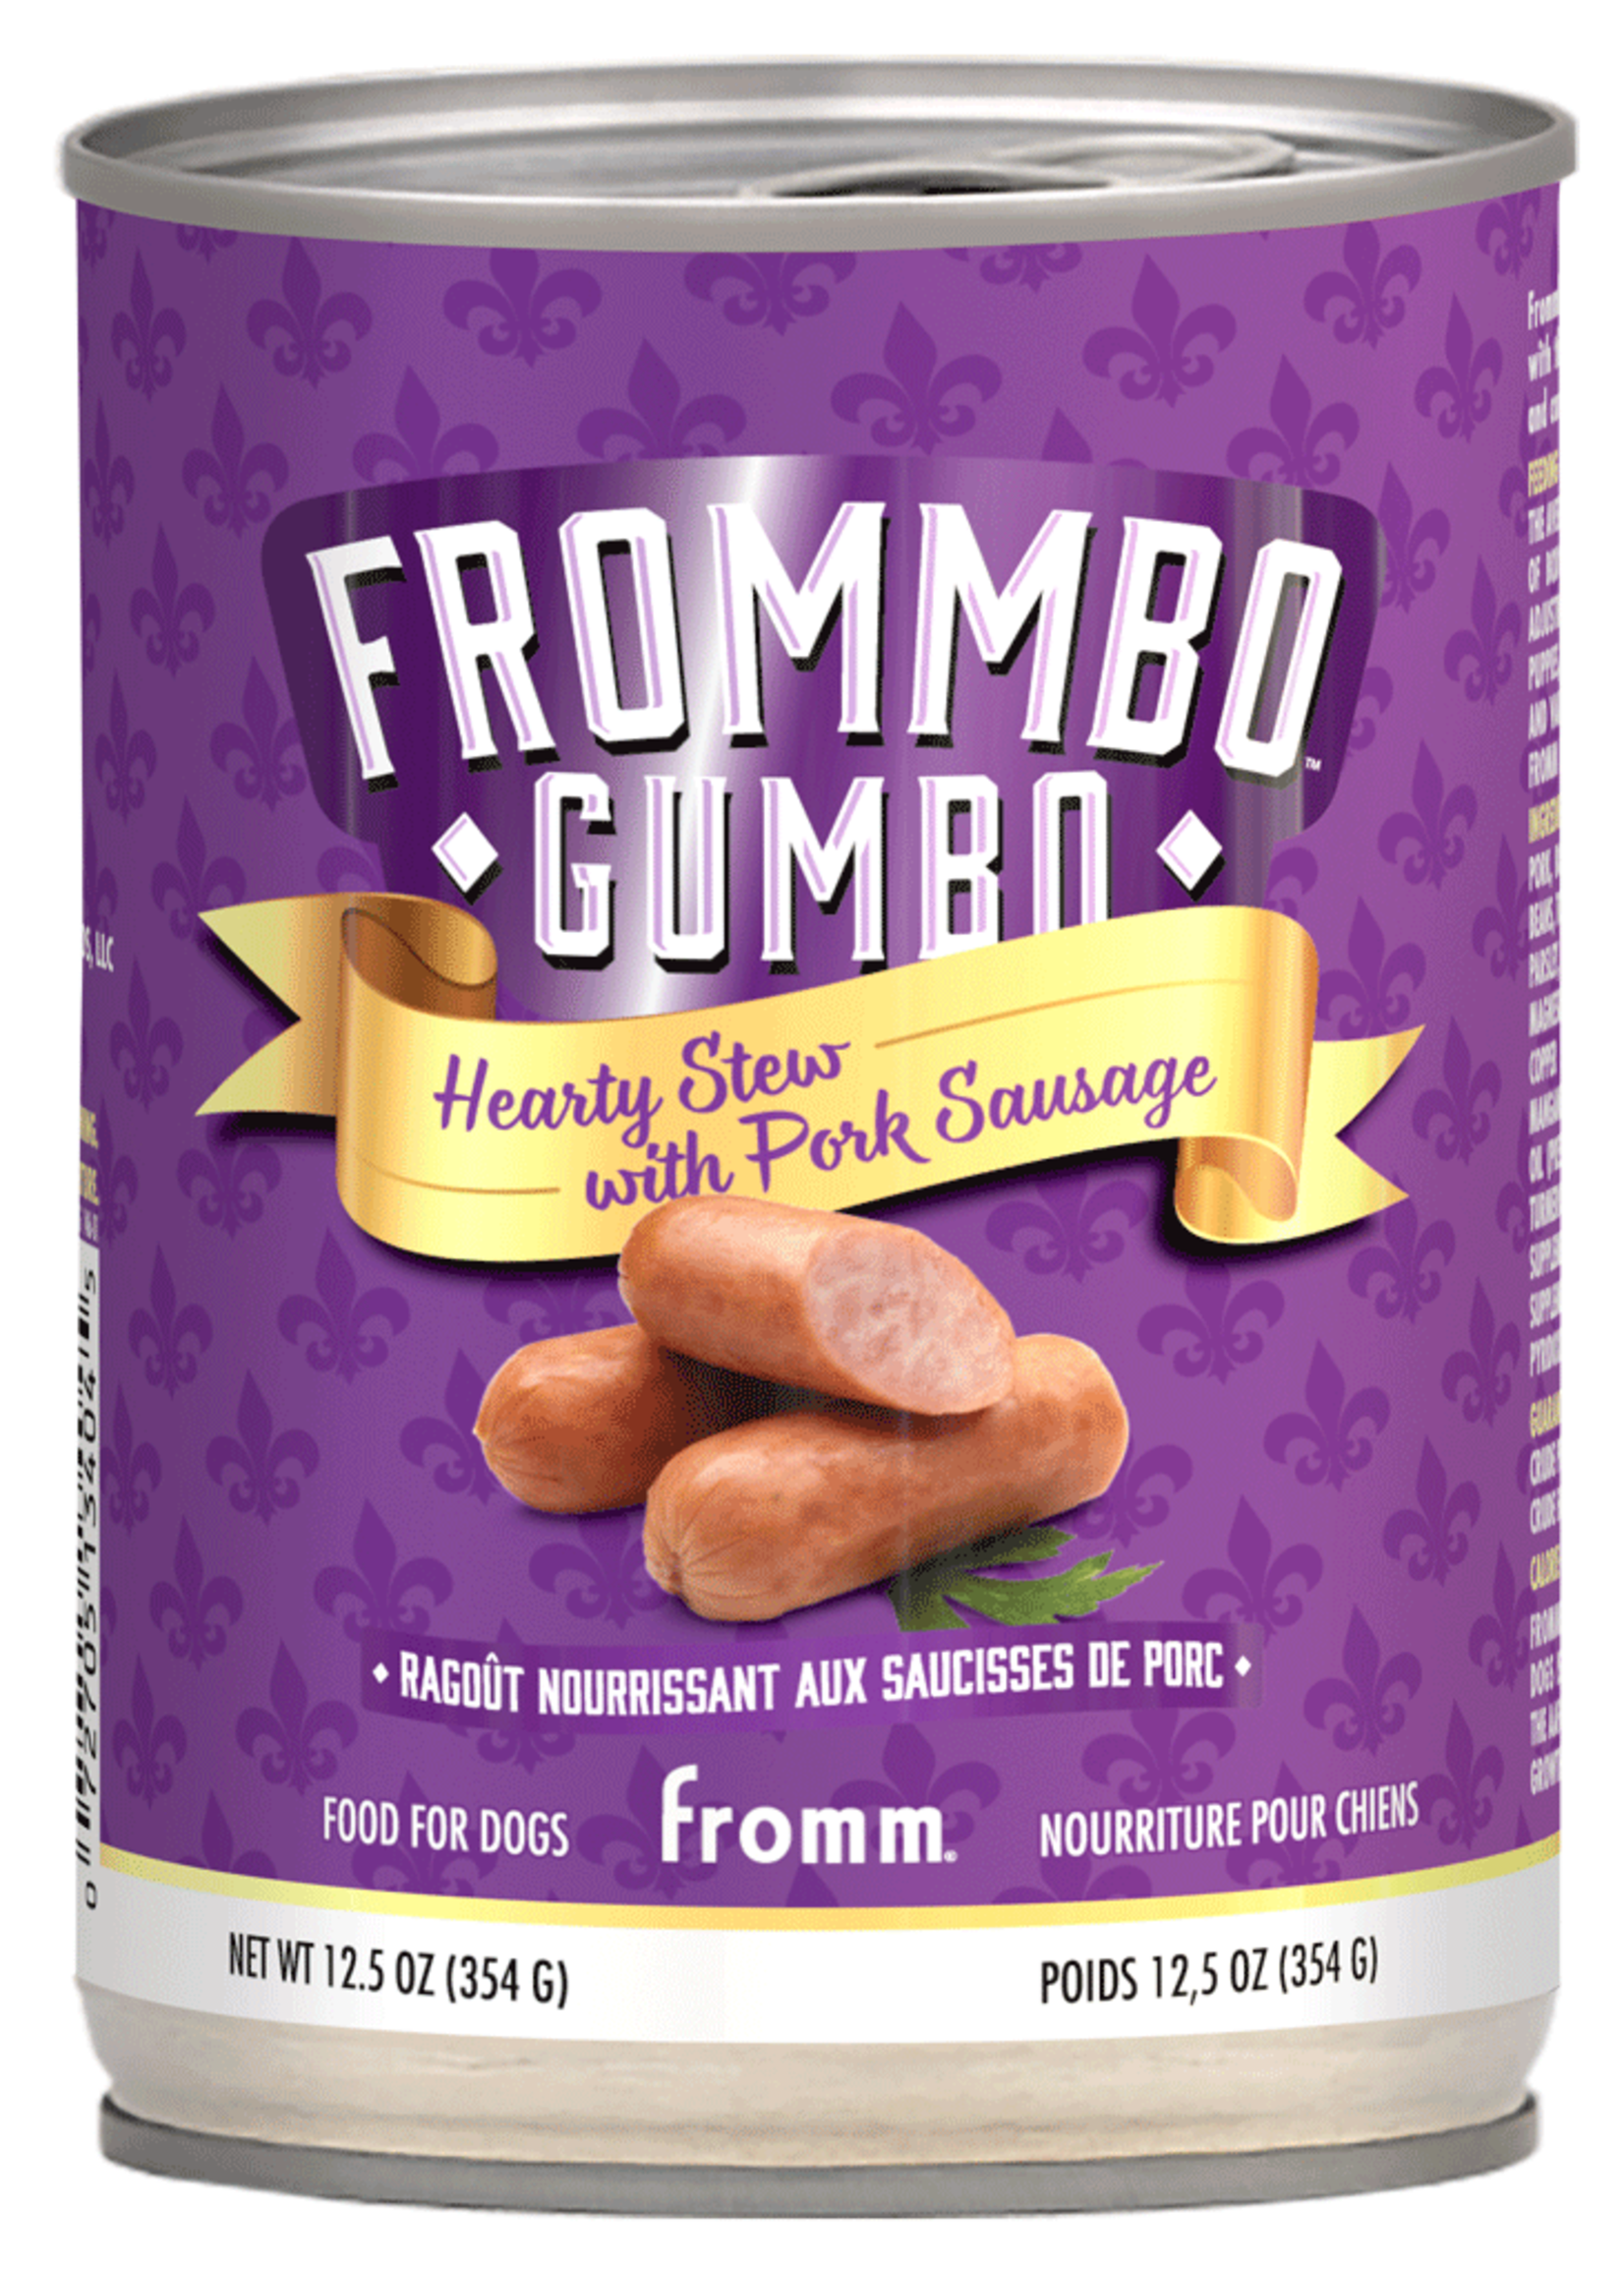 Fromm Family Pet Food Fromm Dog Frommbo Gumbo Hearty Stew w/ Pork Sausage 12.5 oz single